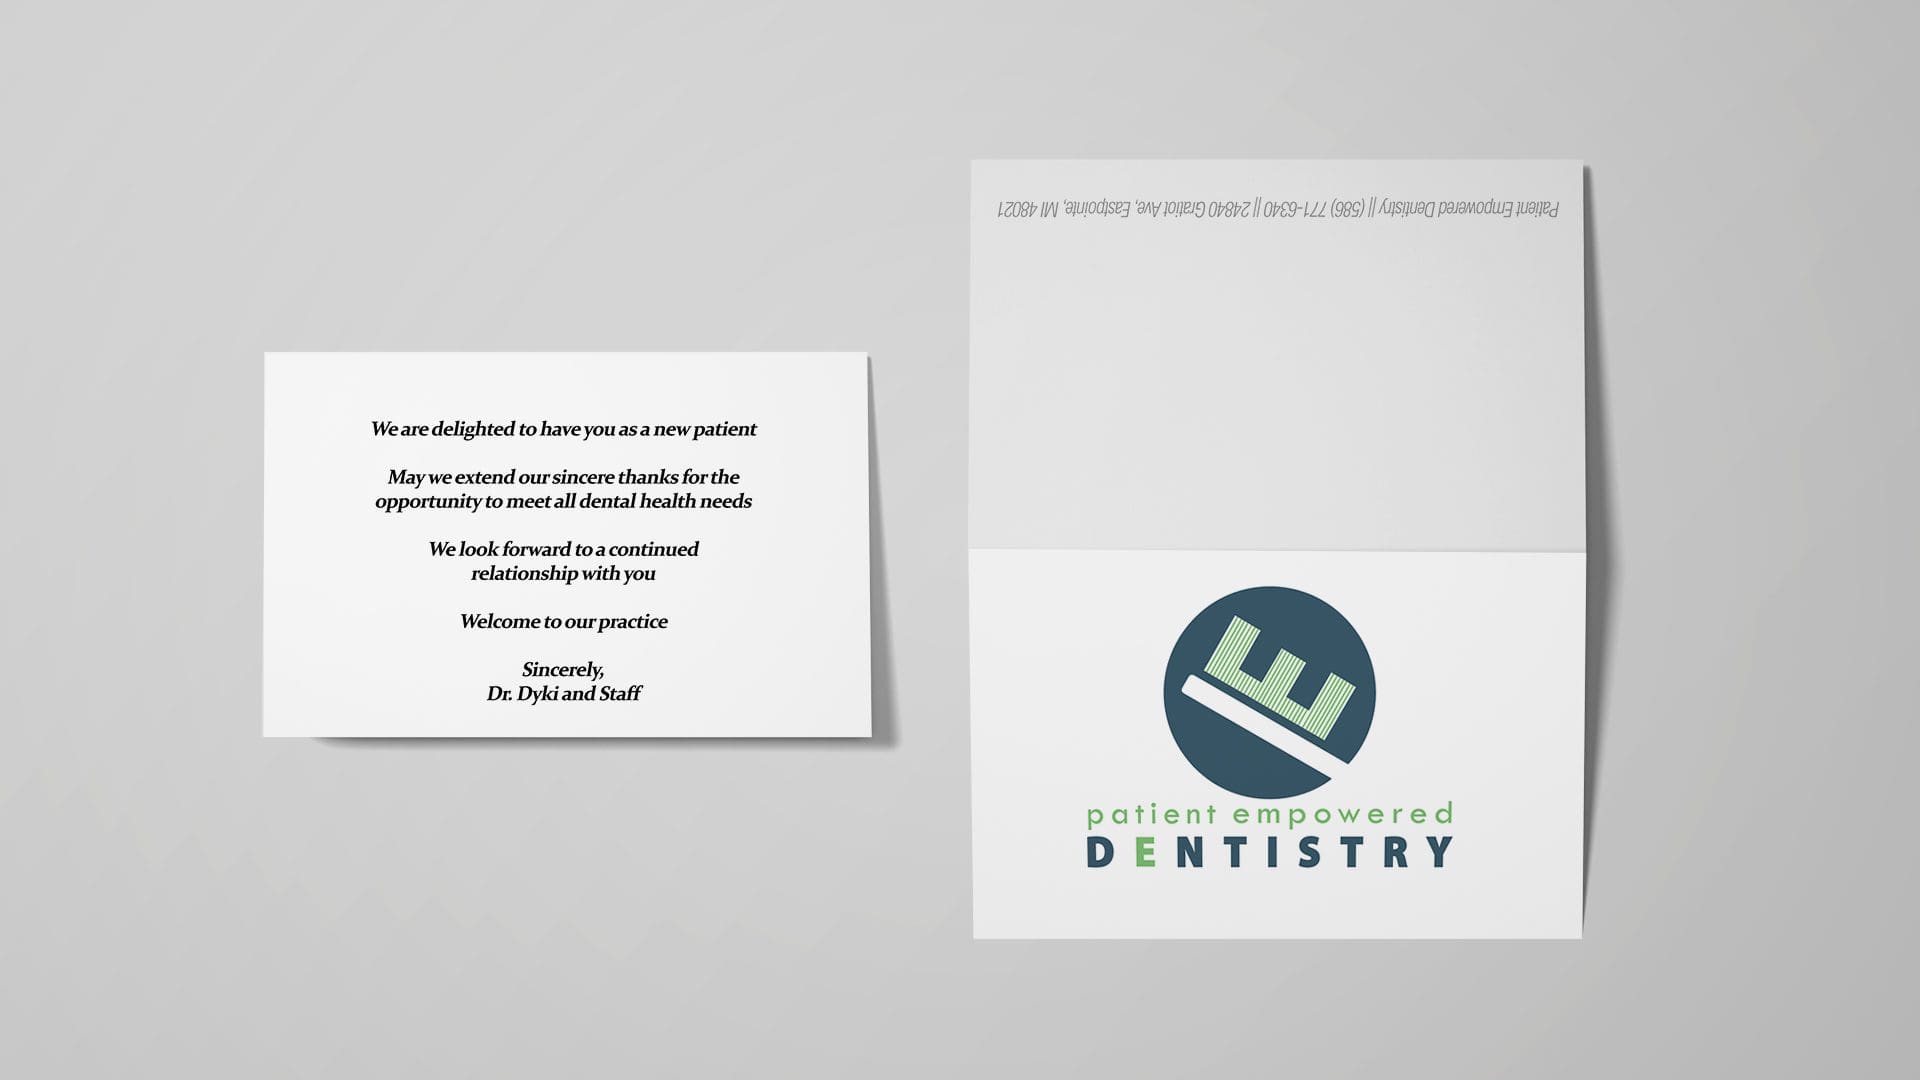 Patient Empowered Dentistry - New Patient Cards Mockup 02